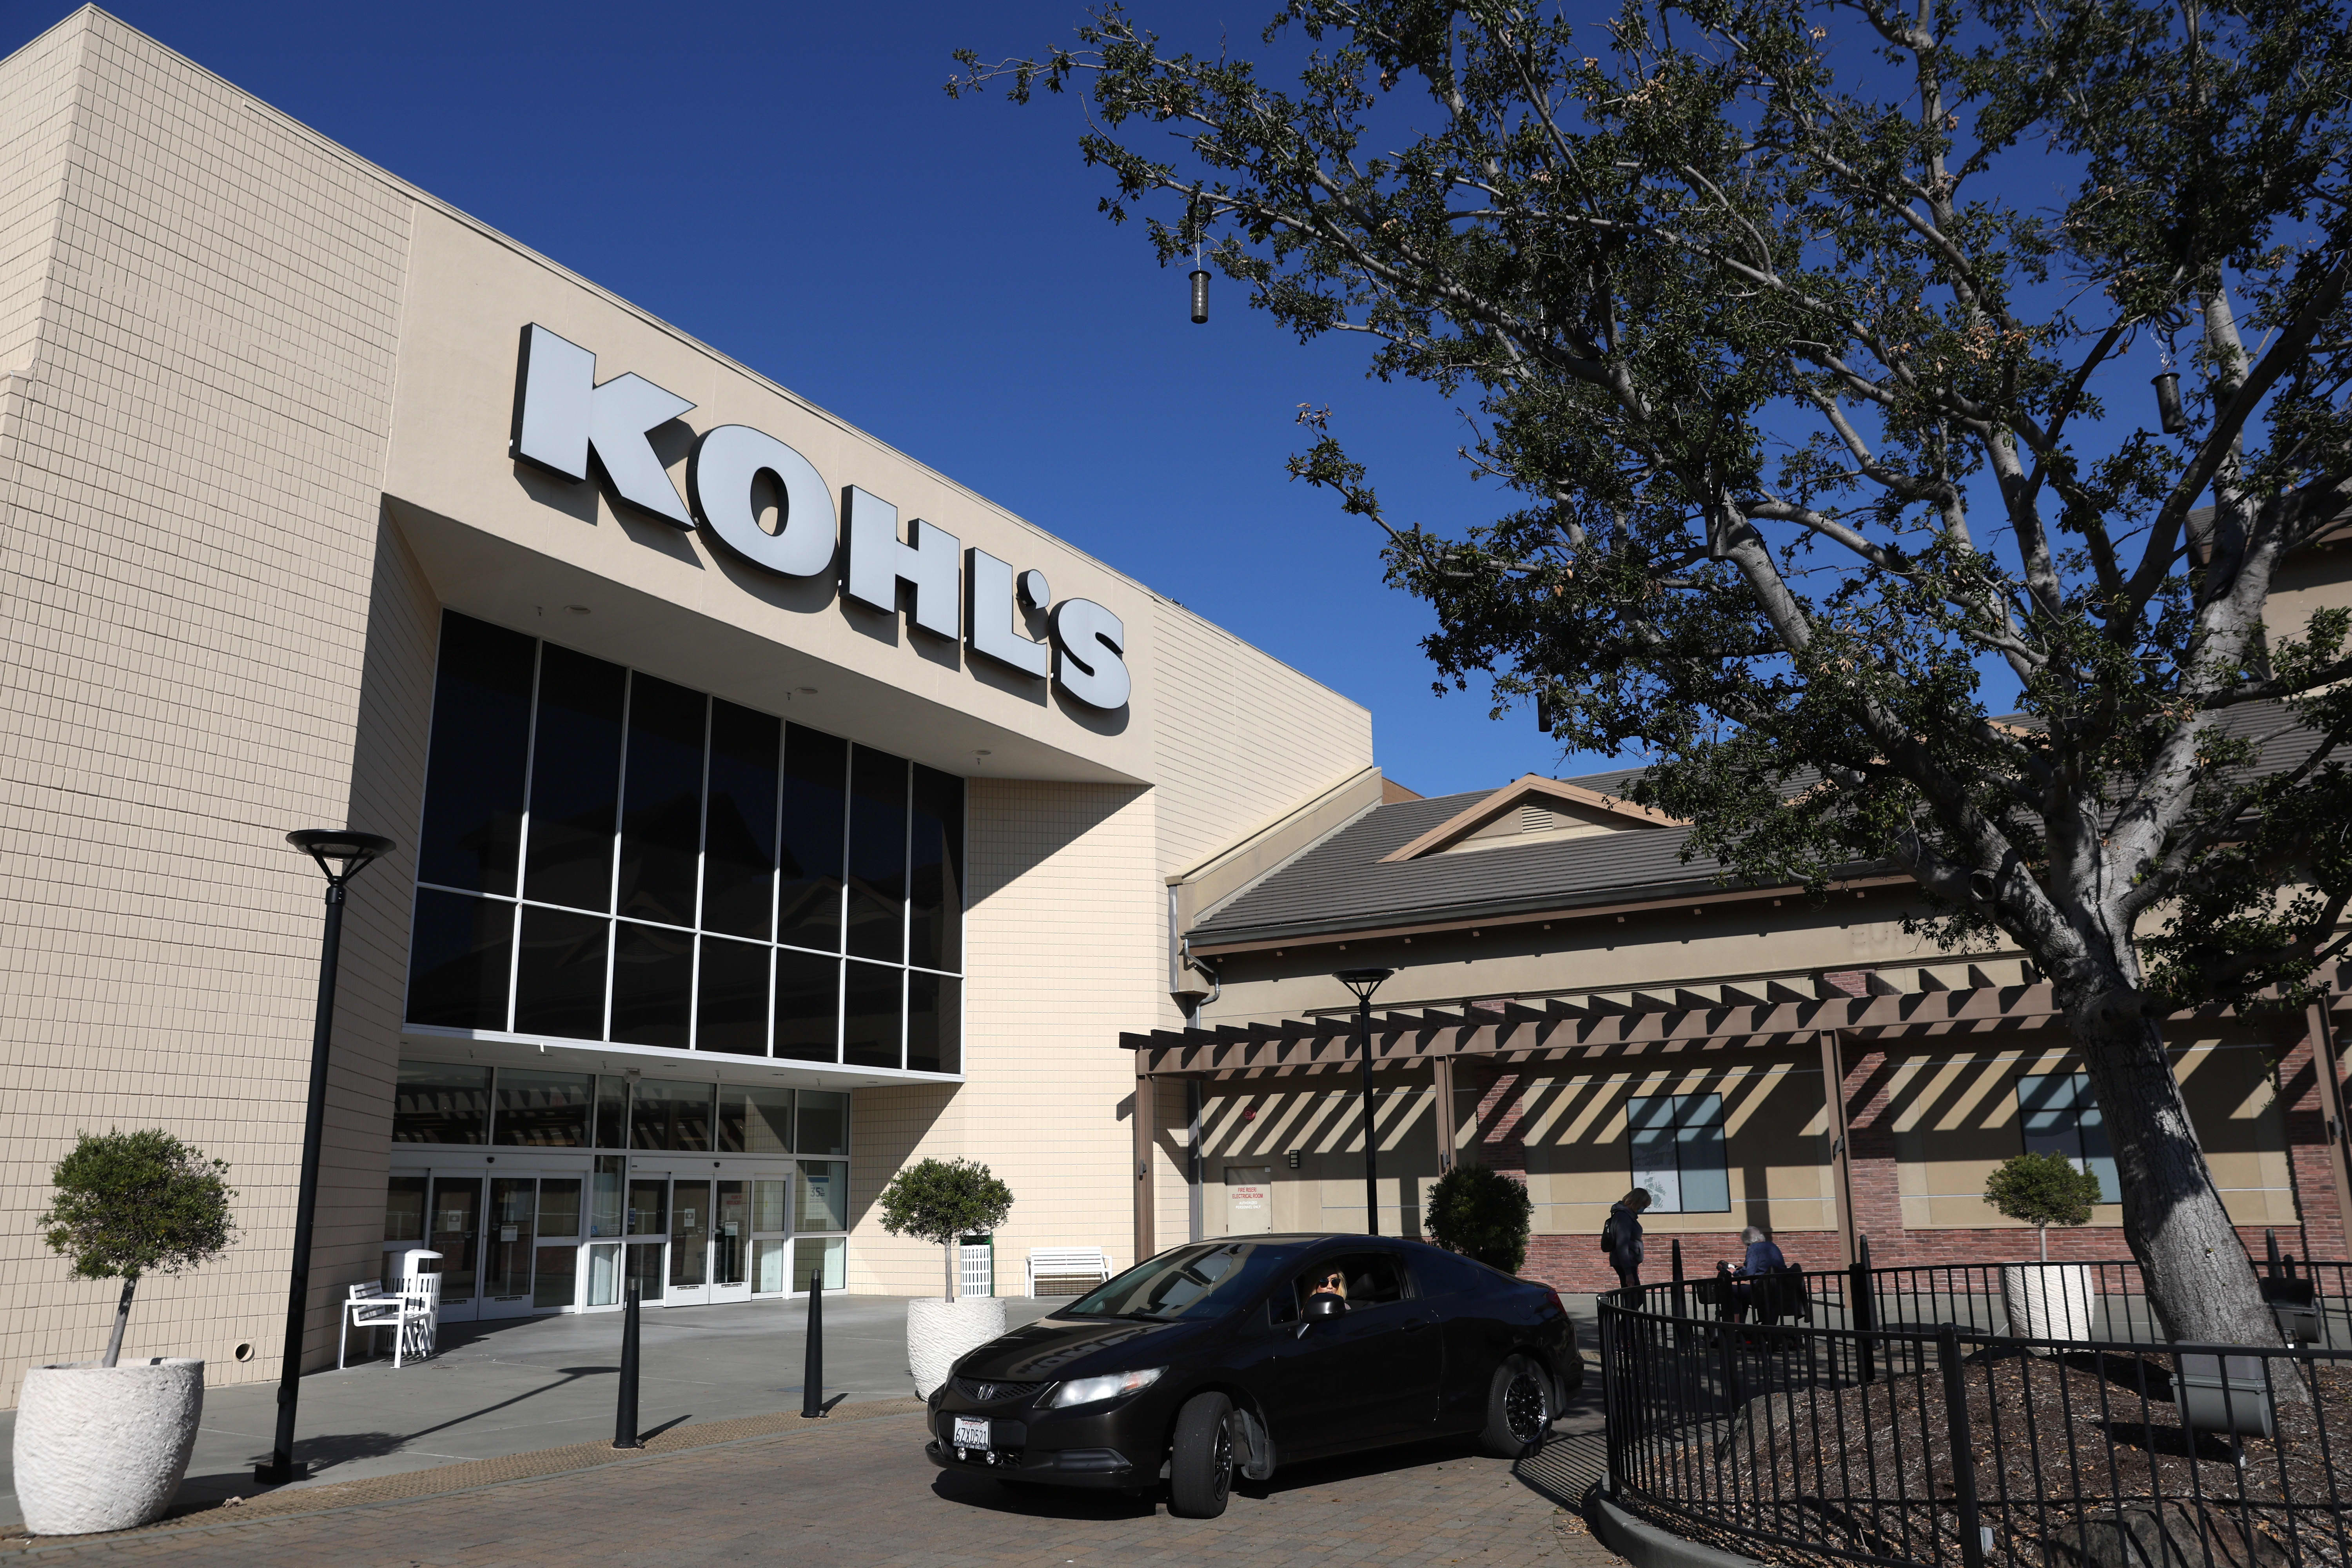 EXCLUSIVE Franchise Group joins bidding for Kohl's